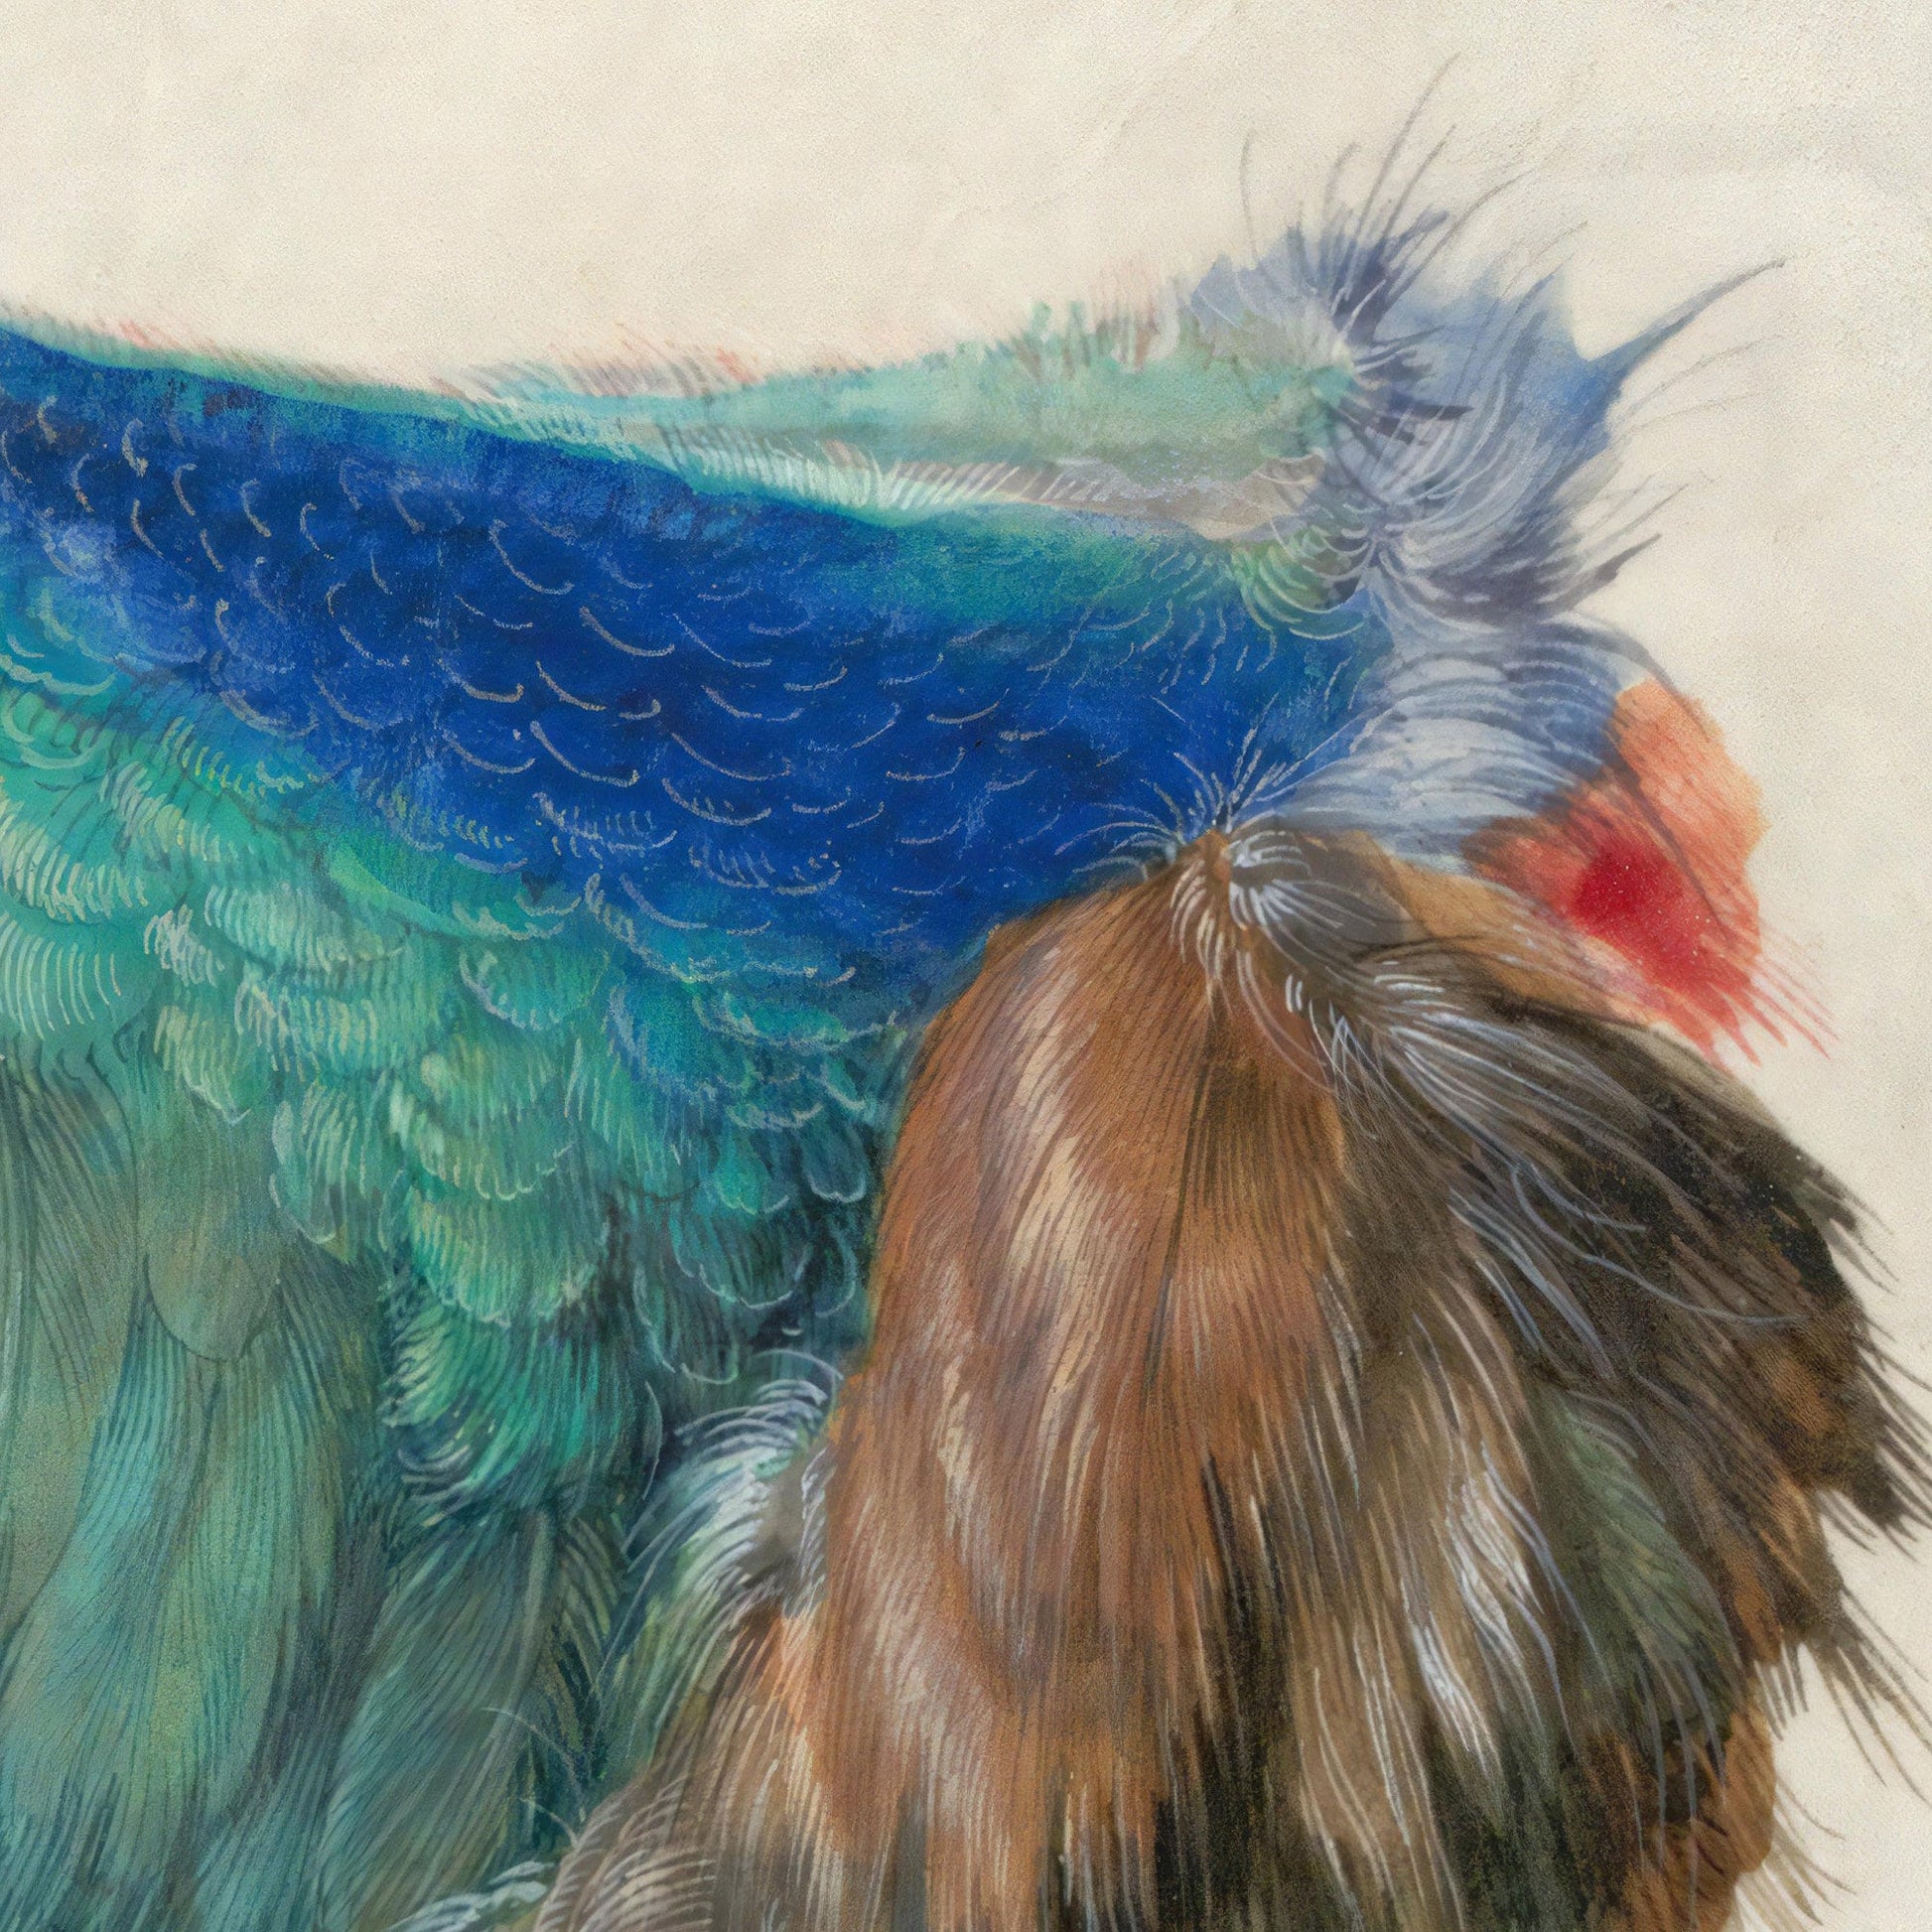 Dead Blue Roller by Albrecht Dürer, 3d Printed with texture and brush strokes looks like original oil-painting, code:431